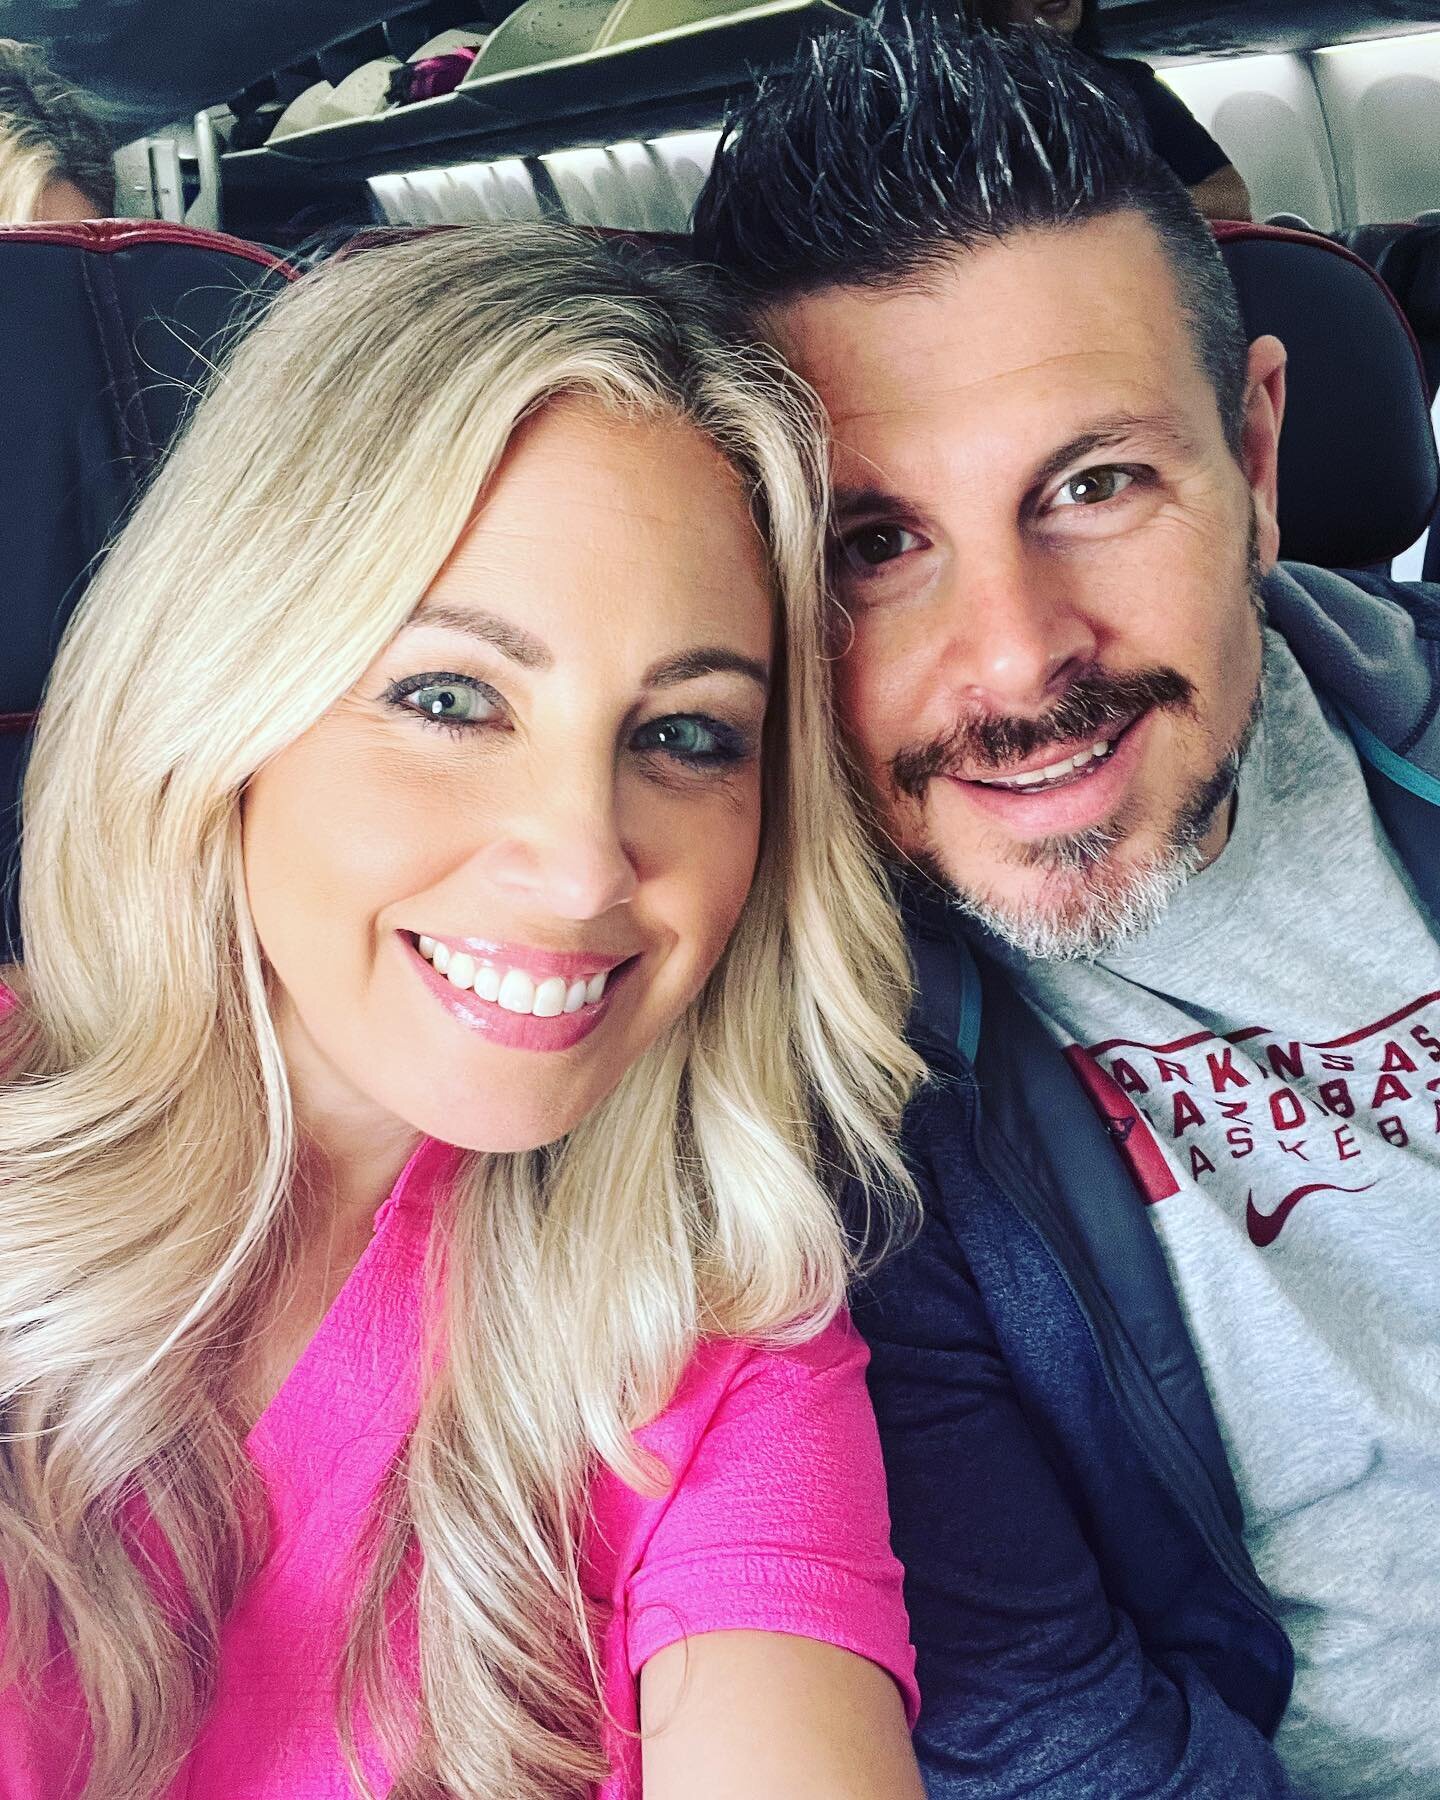 It&rsquo;s been 20 years since our last trip when this guy asked me to be his wife! 

Here we are, 3 kids and lots of life later and we are headed back to Belize for a much needed getaway with dear friends &hearts;️🌴🌊☀️

@lizgarrett84 @juliep20 @jc